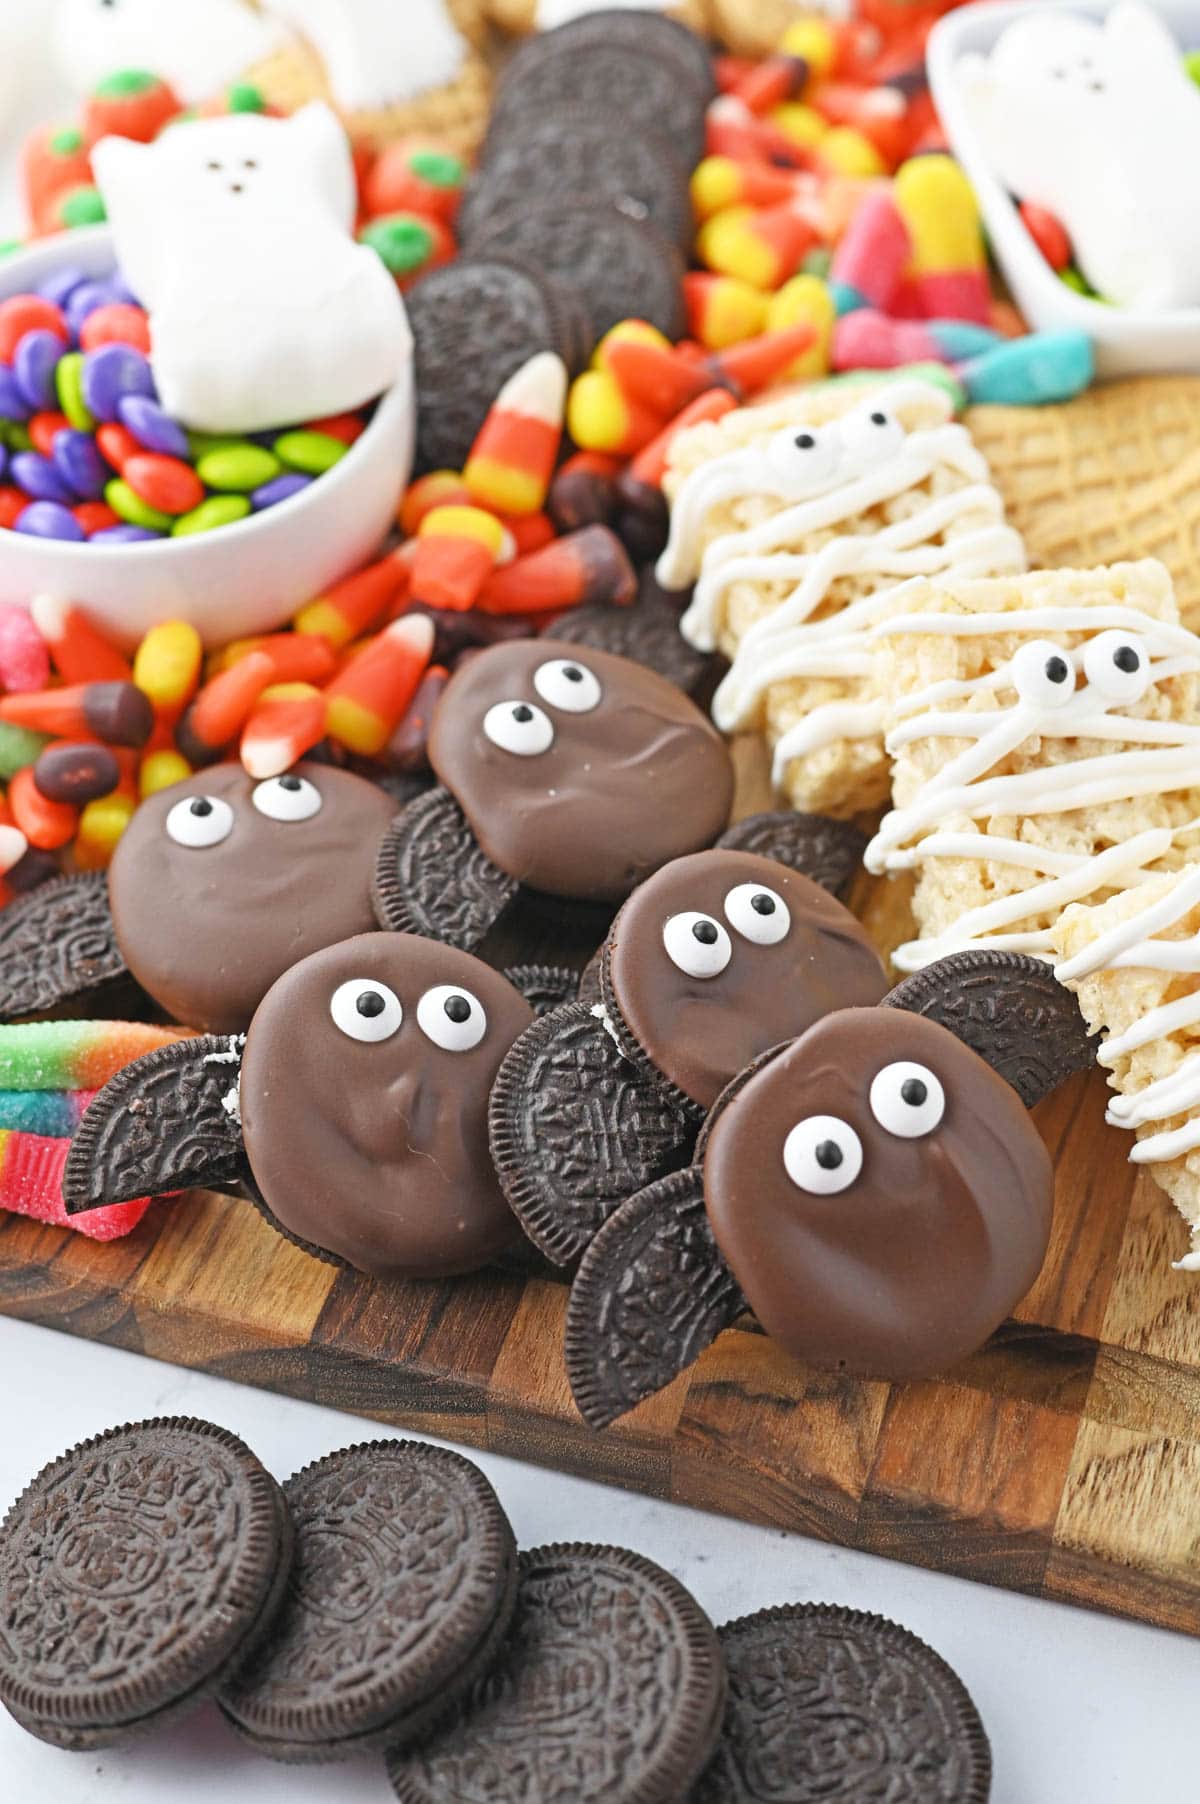 Oreo bats with other Halloween food